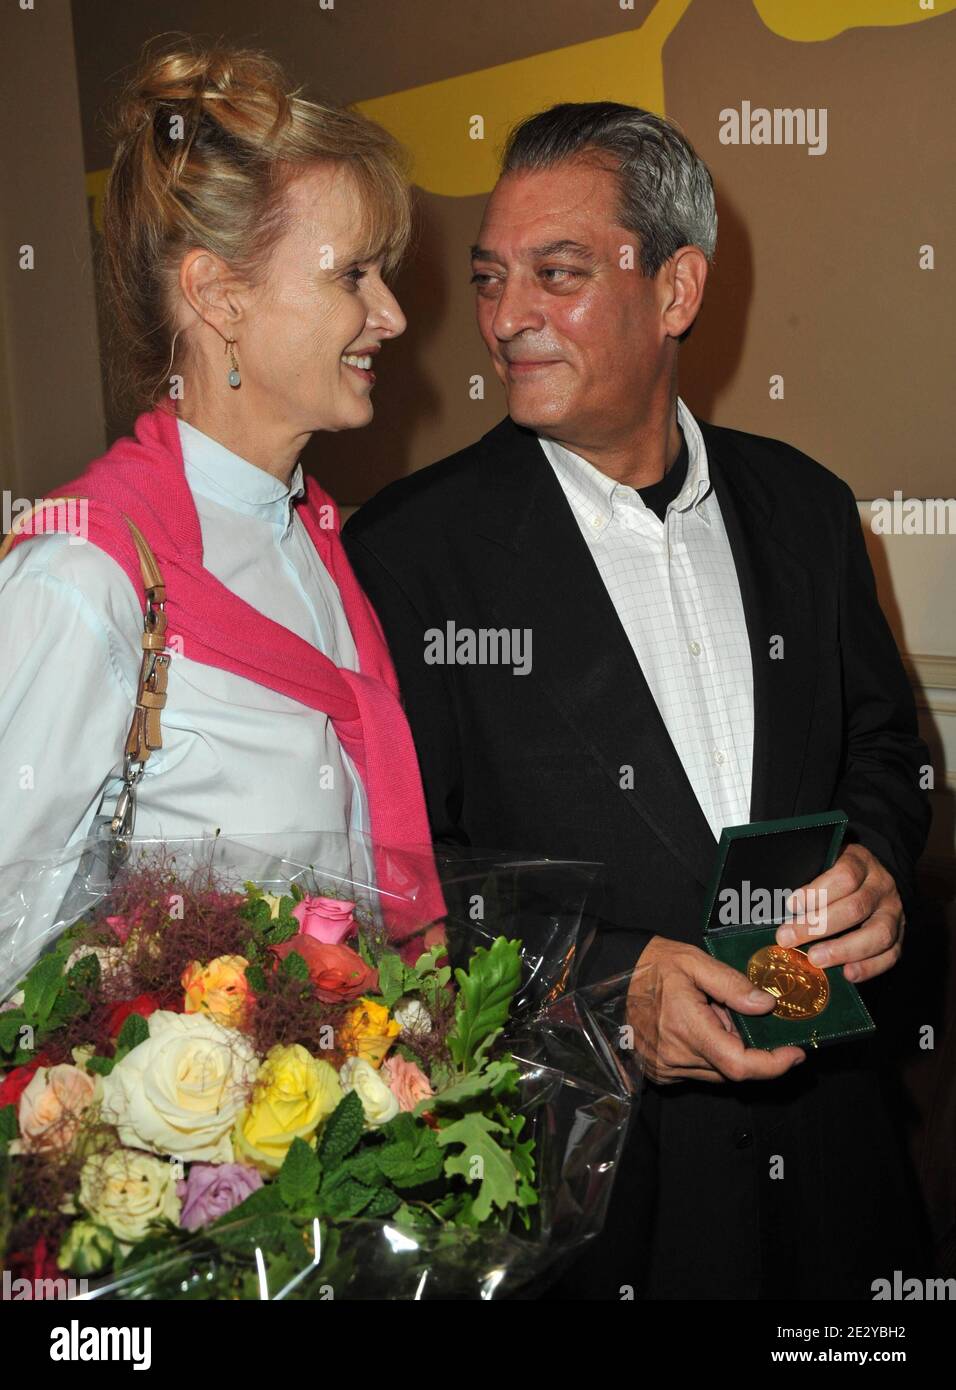 US novelist Paul Auster and his wife Siri Hustvedt during an award ceremony  after he received the 'Grand Vermeil' medal from the mayor of Paris  Bertrand Delanoe, on June 10, 2010 in